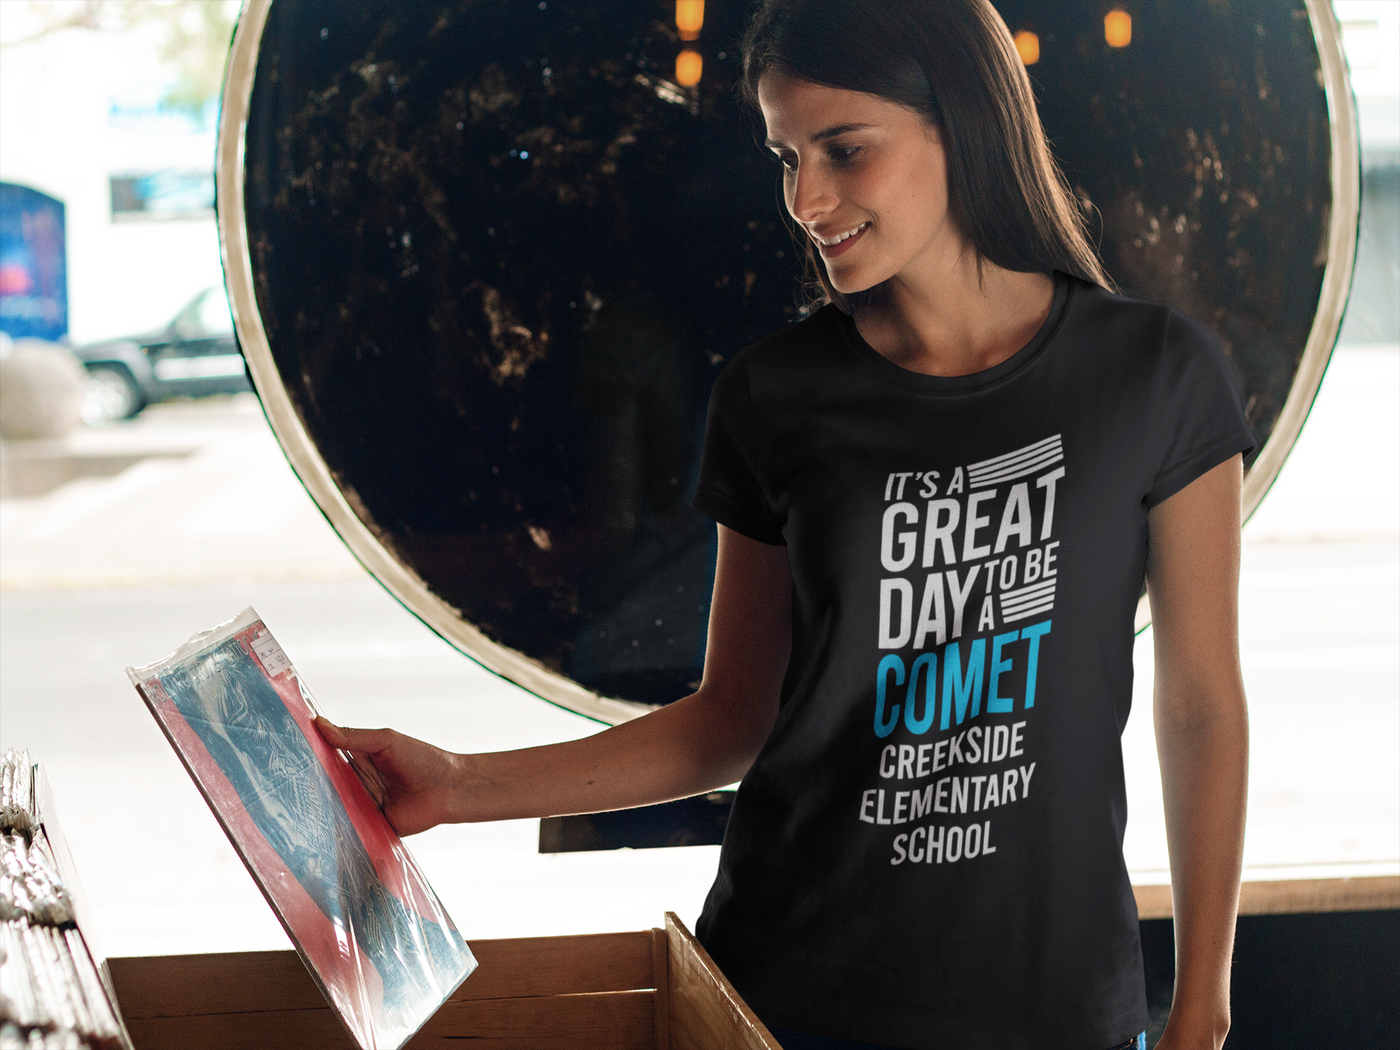 It’s A Great Day To Be A Comet Adult Fashion Tee